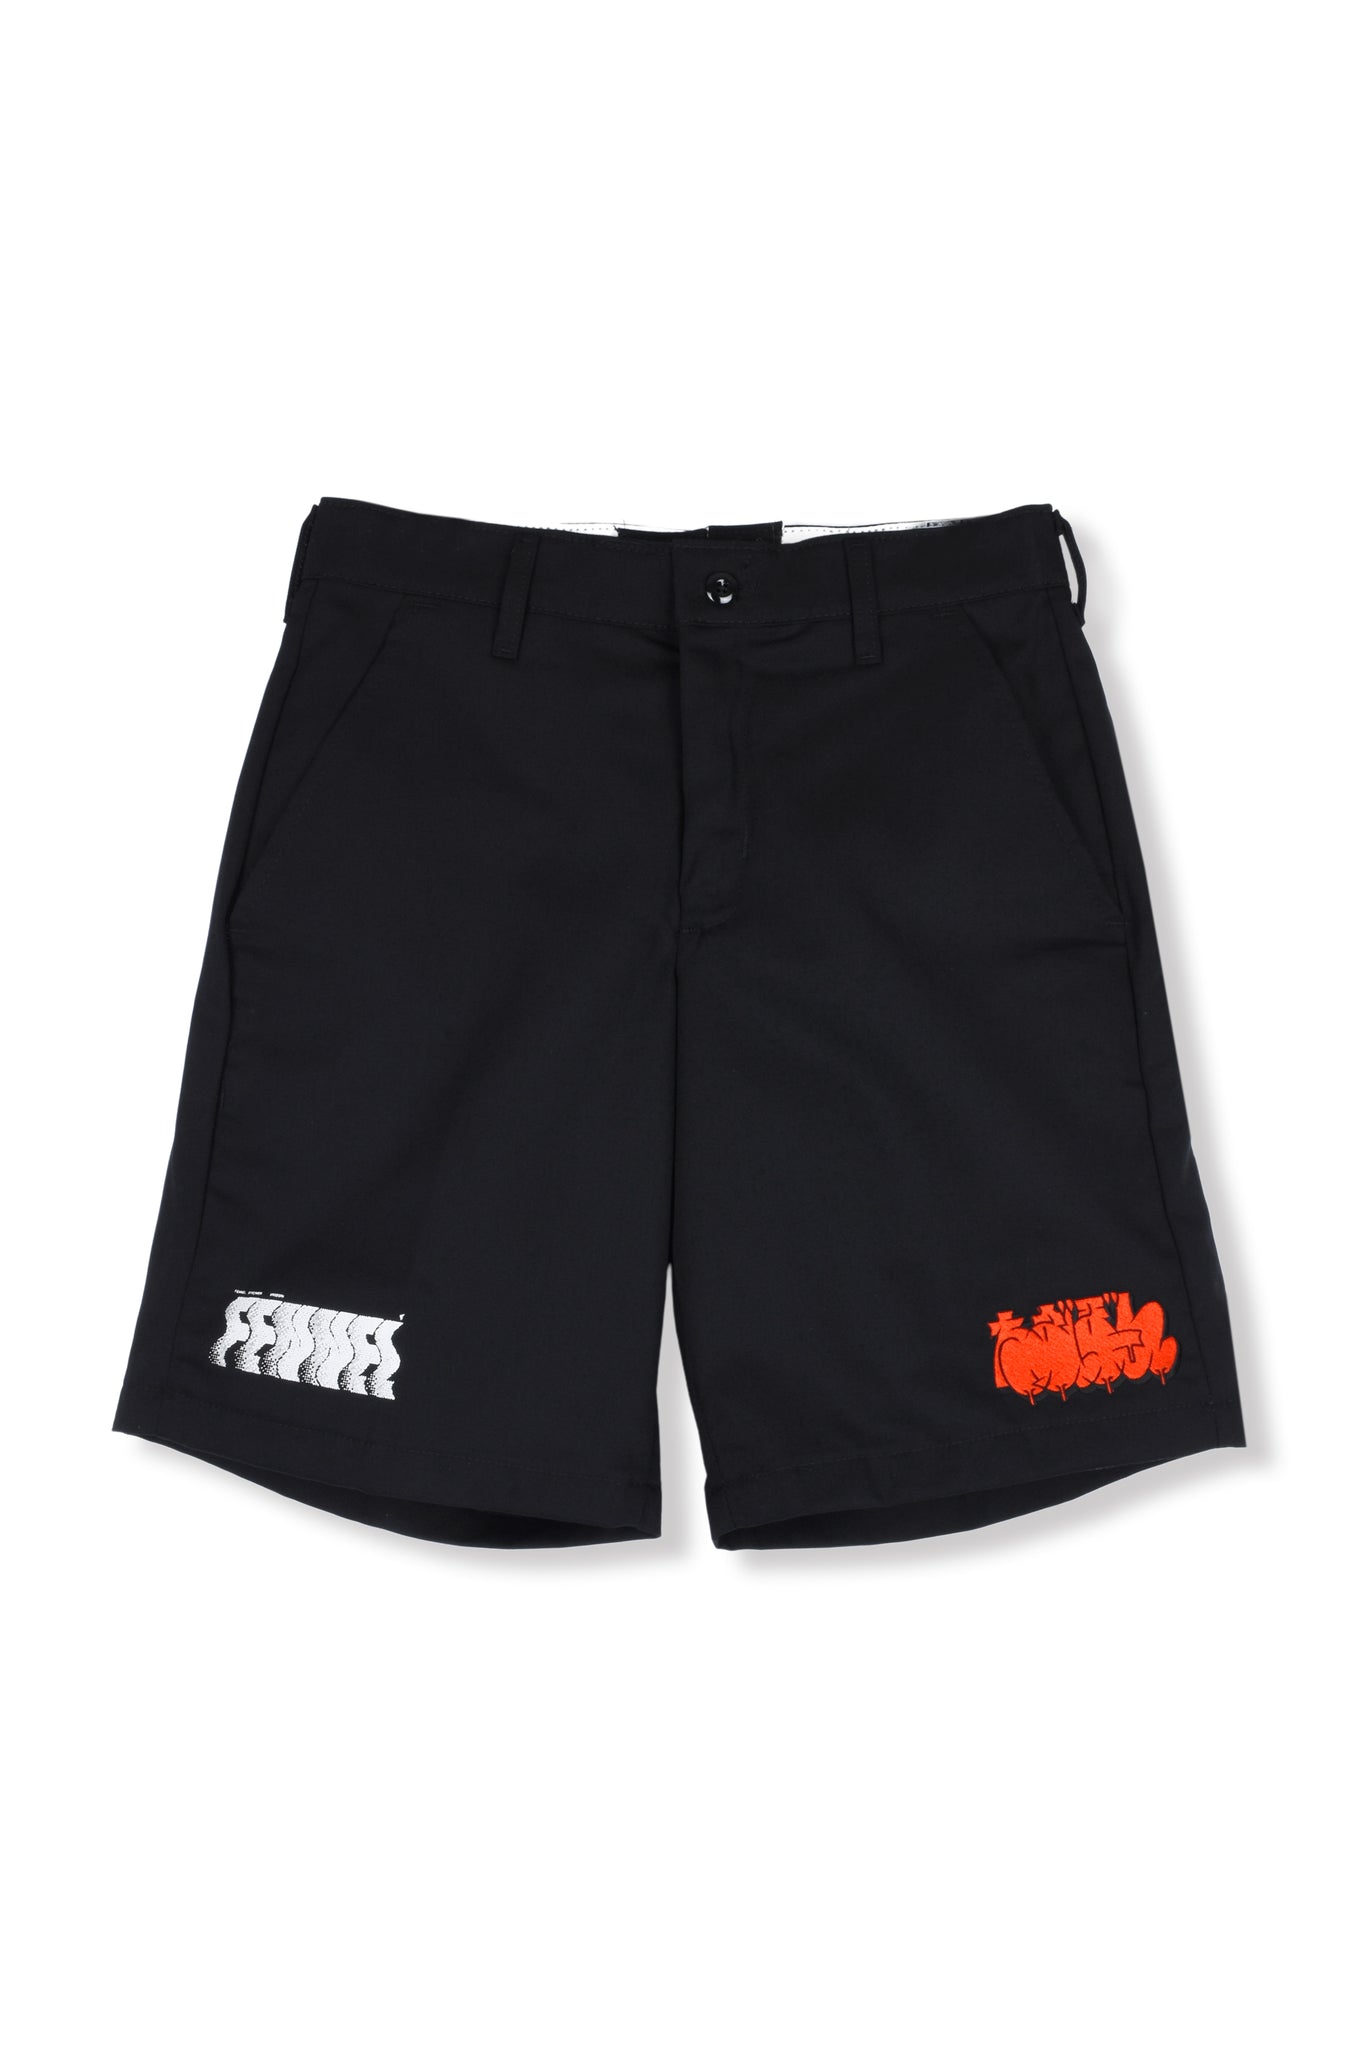 WASBORN EMBROIDERY WORK SHORTS